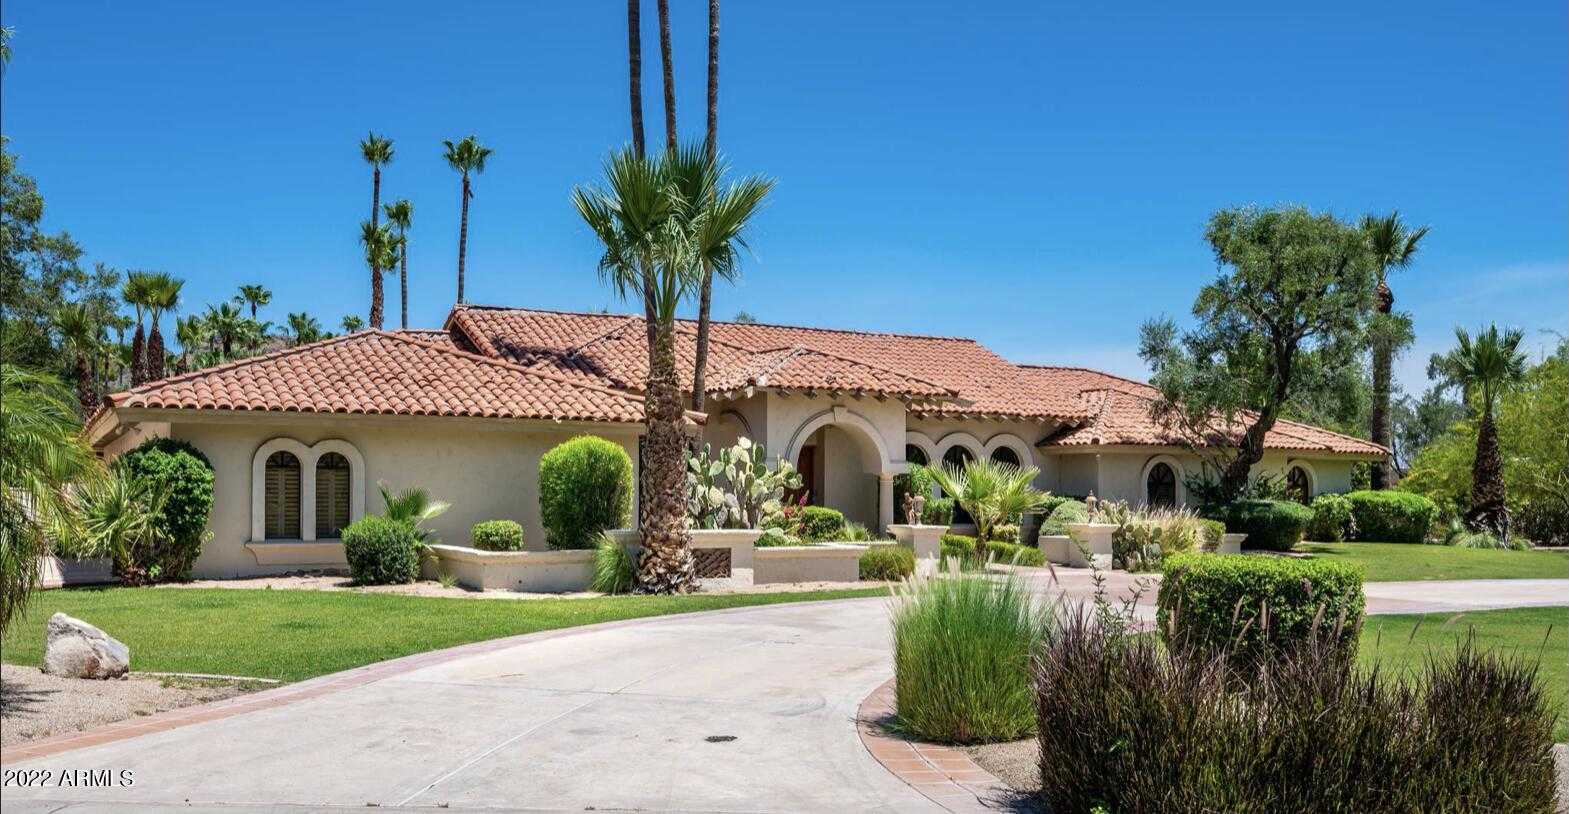 $3,600,000 - 4Br/5Ba - Home for Sale in Finisterre, Paradise Valley